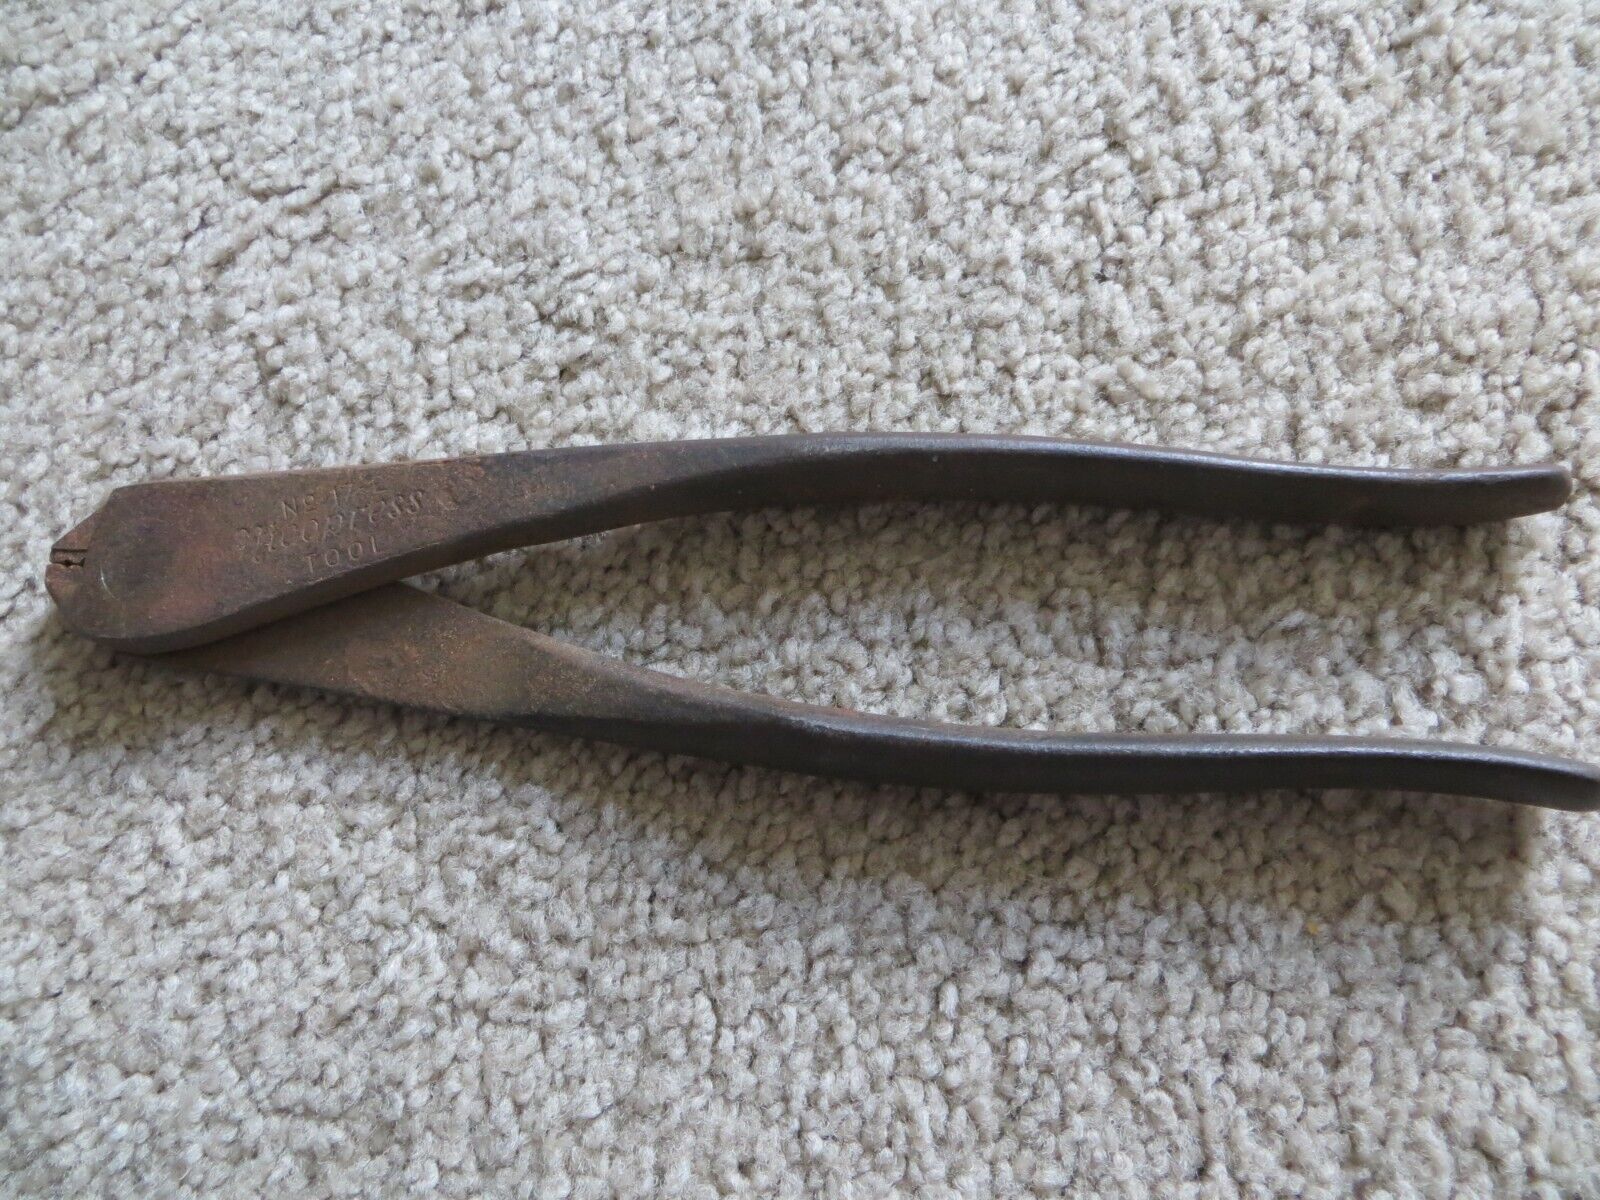 VINTAGE NICOPRESS CRIMPING PLIERS NO. 17-2 TOOL THE NATIONAL TELEPHONE SUPPLY CO